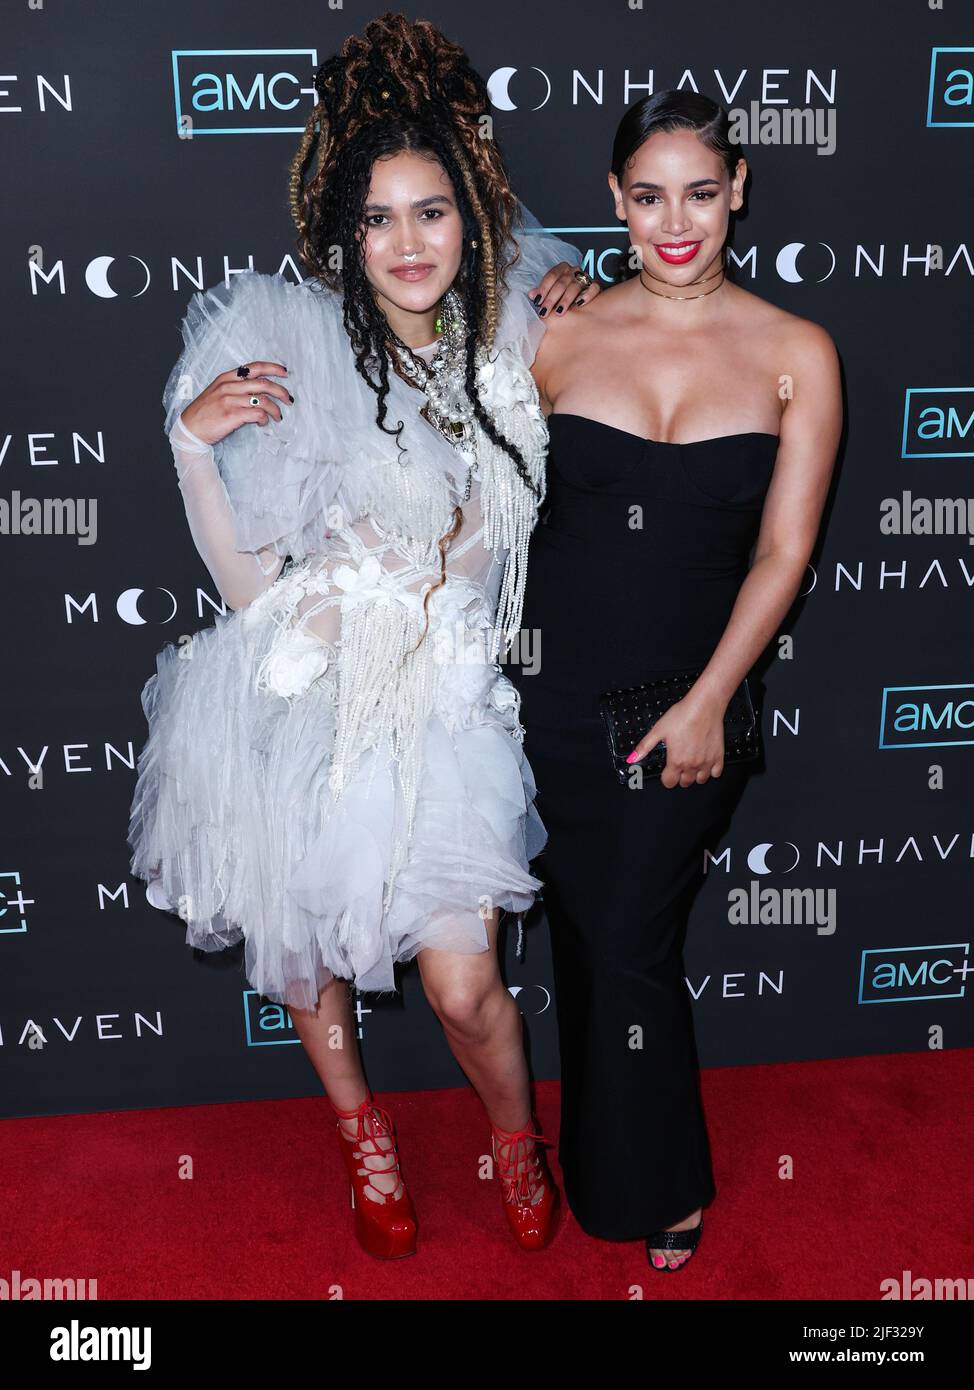 WEST HOLLYWOOD, LOS ANGELES, CALIFORNIA, USA - JUNE 28: British actresses Emma McDonald and Yazzmin Newell arrive at the Los Angeles Premiere Of AMC+'s Original Series 'Moonhaven' held at the The London Hotel West Hollywood at Beverly Hills on June 28, 2022 in West Hollywood, Los Angeles, California, United States. (Photo by Xavier Collin/Image Press Agency) Stock Photo